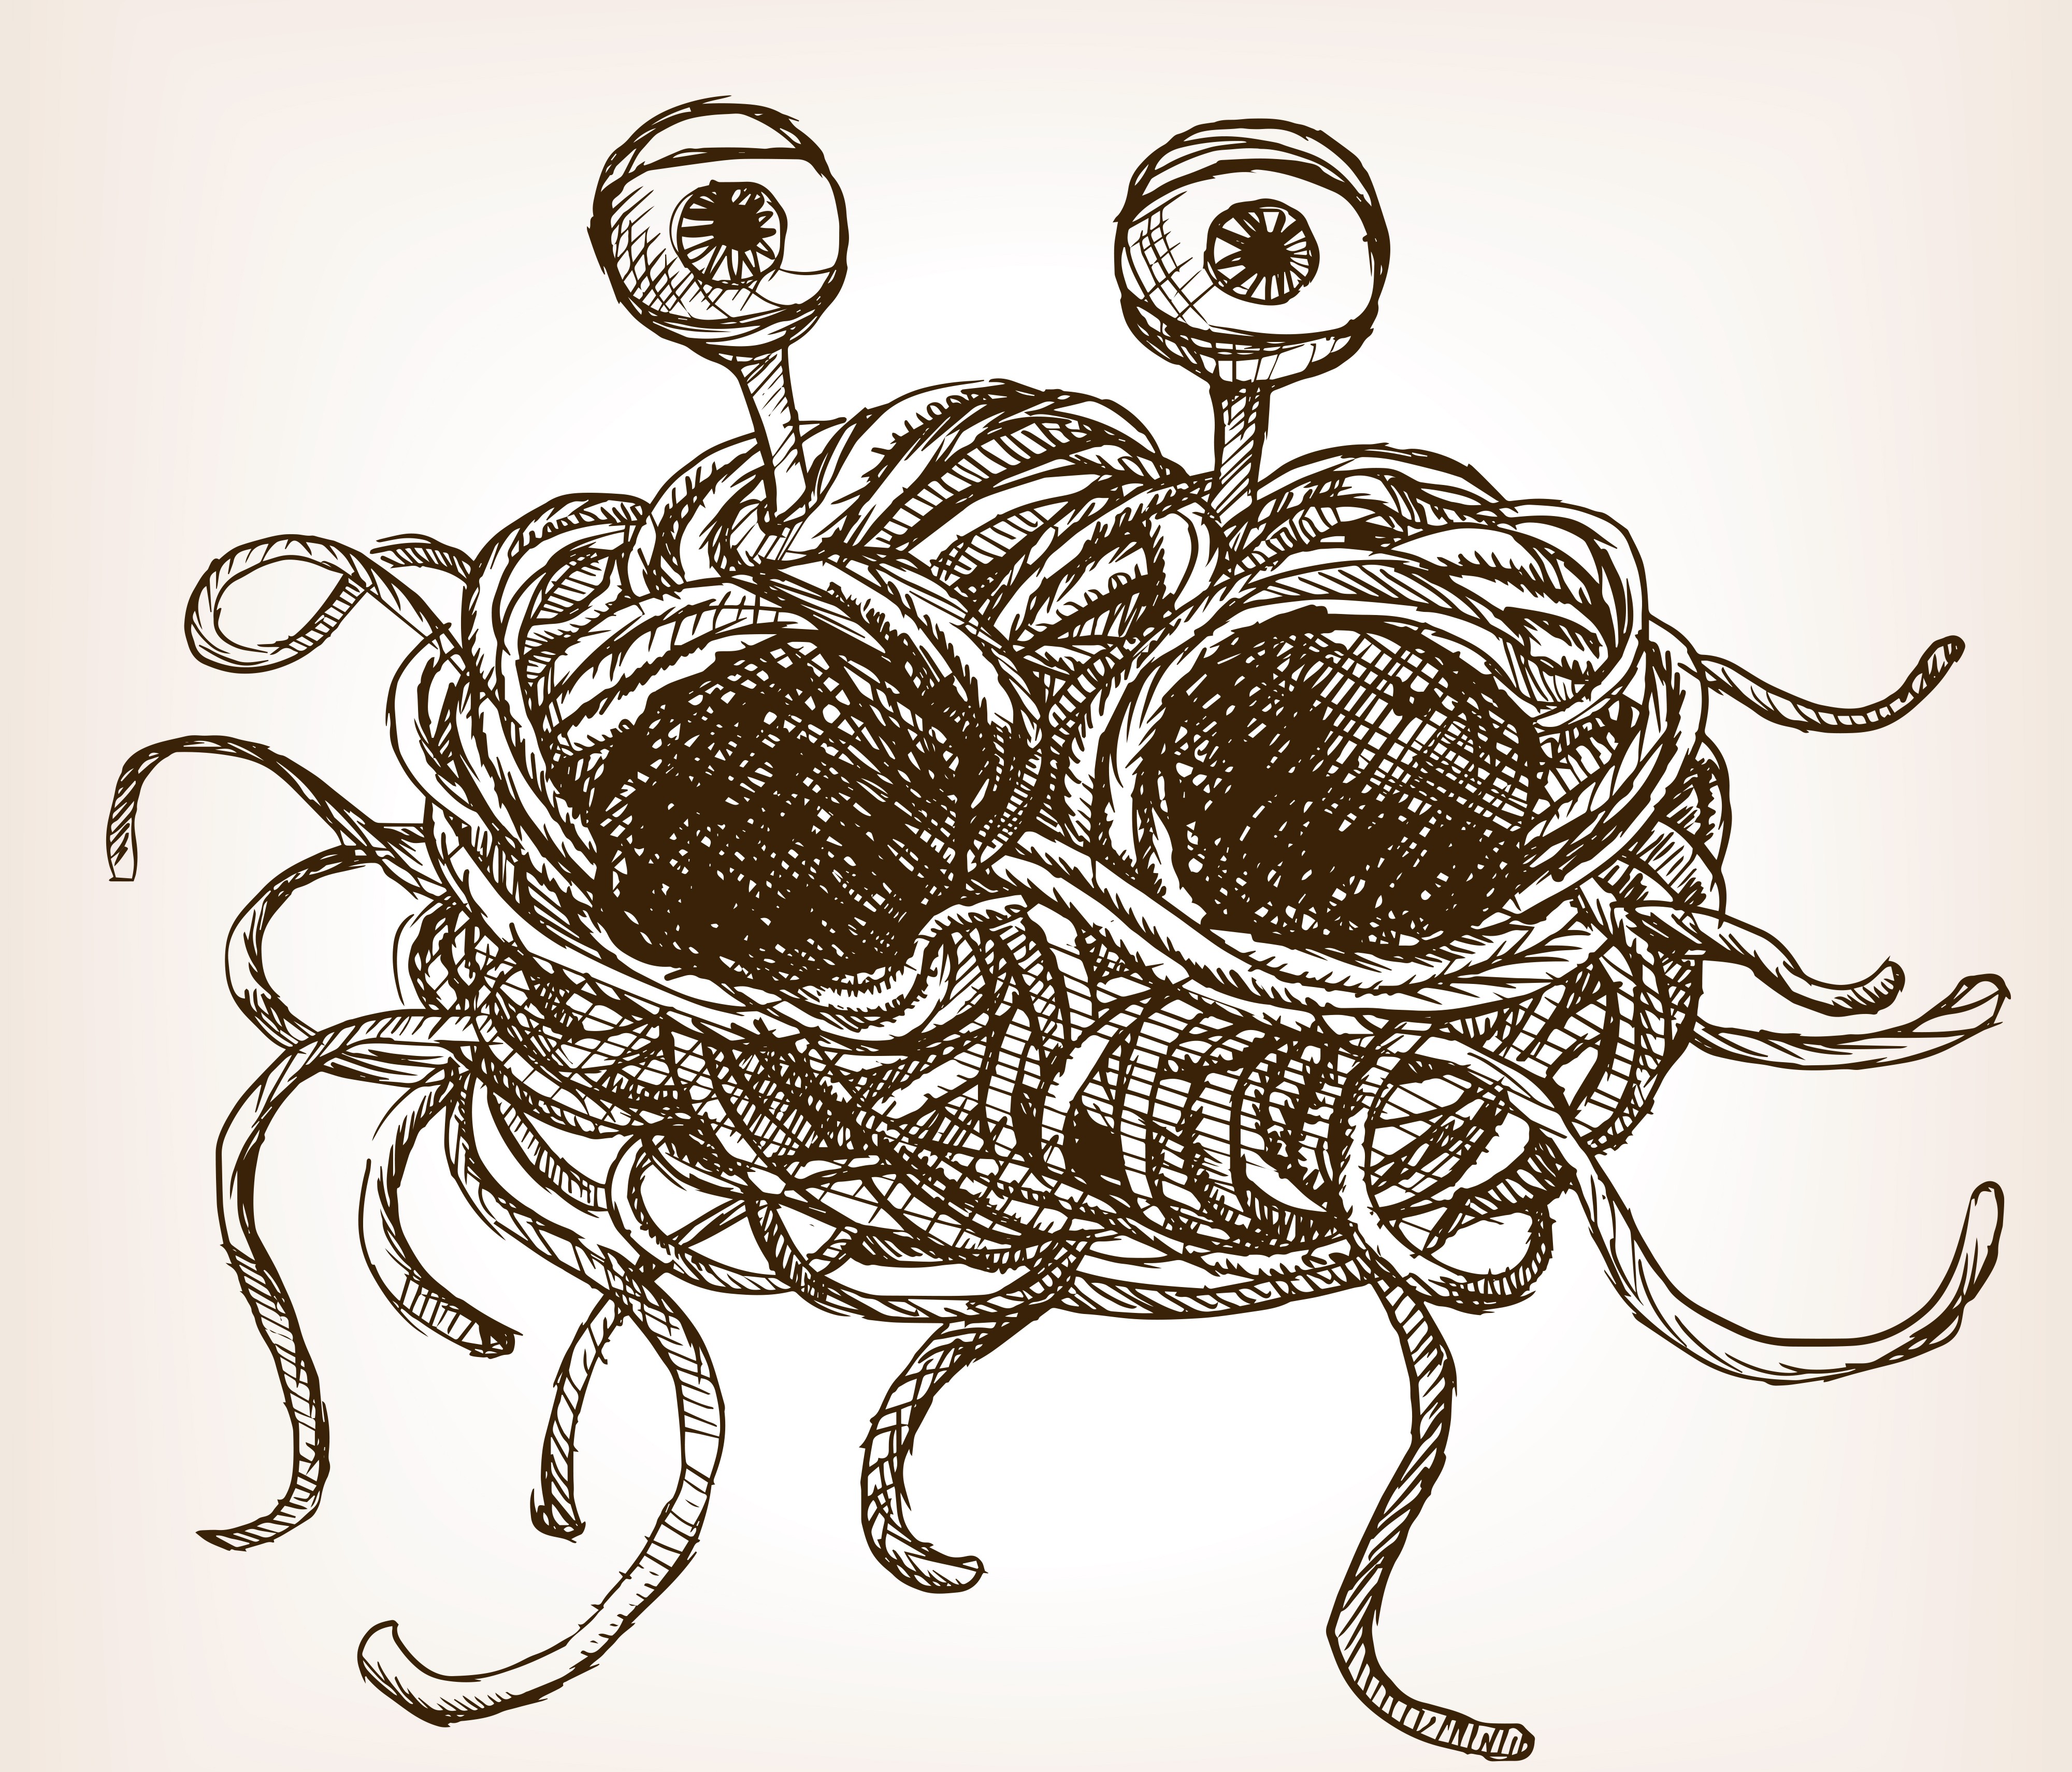 A hand-drawn sketch of the Flying spaghetti monster. (credit: istock)